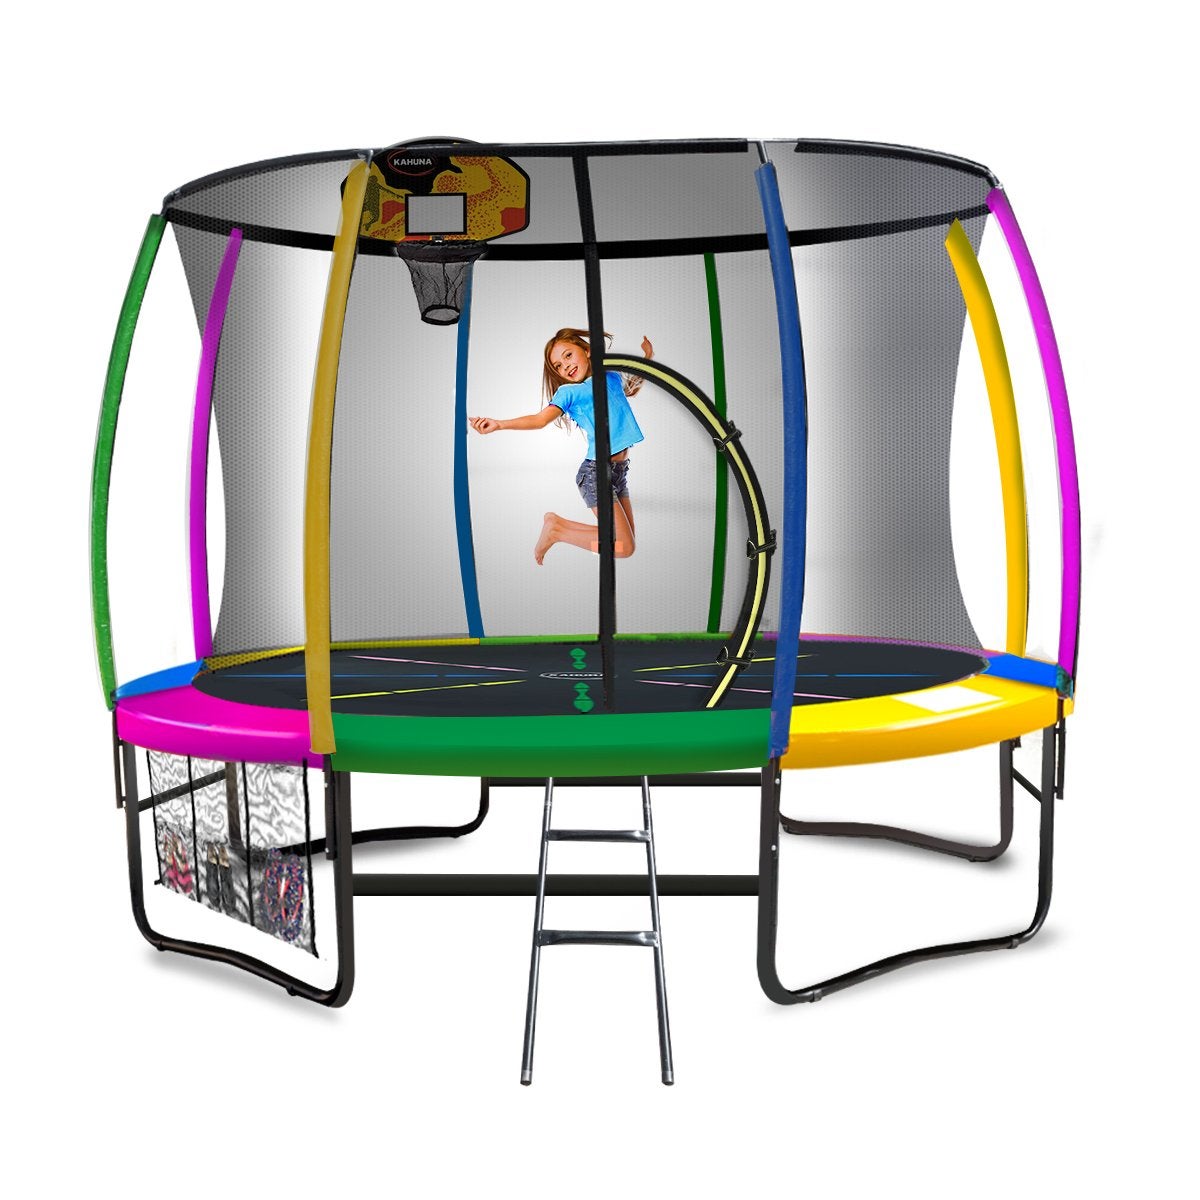 Kahuna 16ft Round Spring Trampoline Free Safety Net Pad Cover Mat Ladder Basketball Set